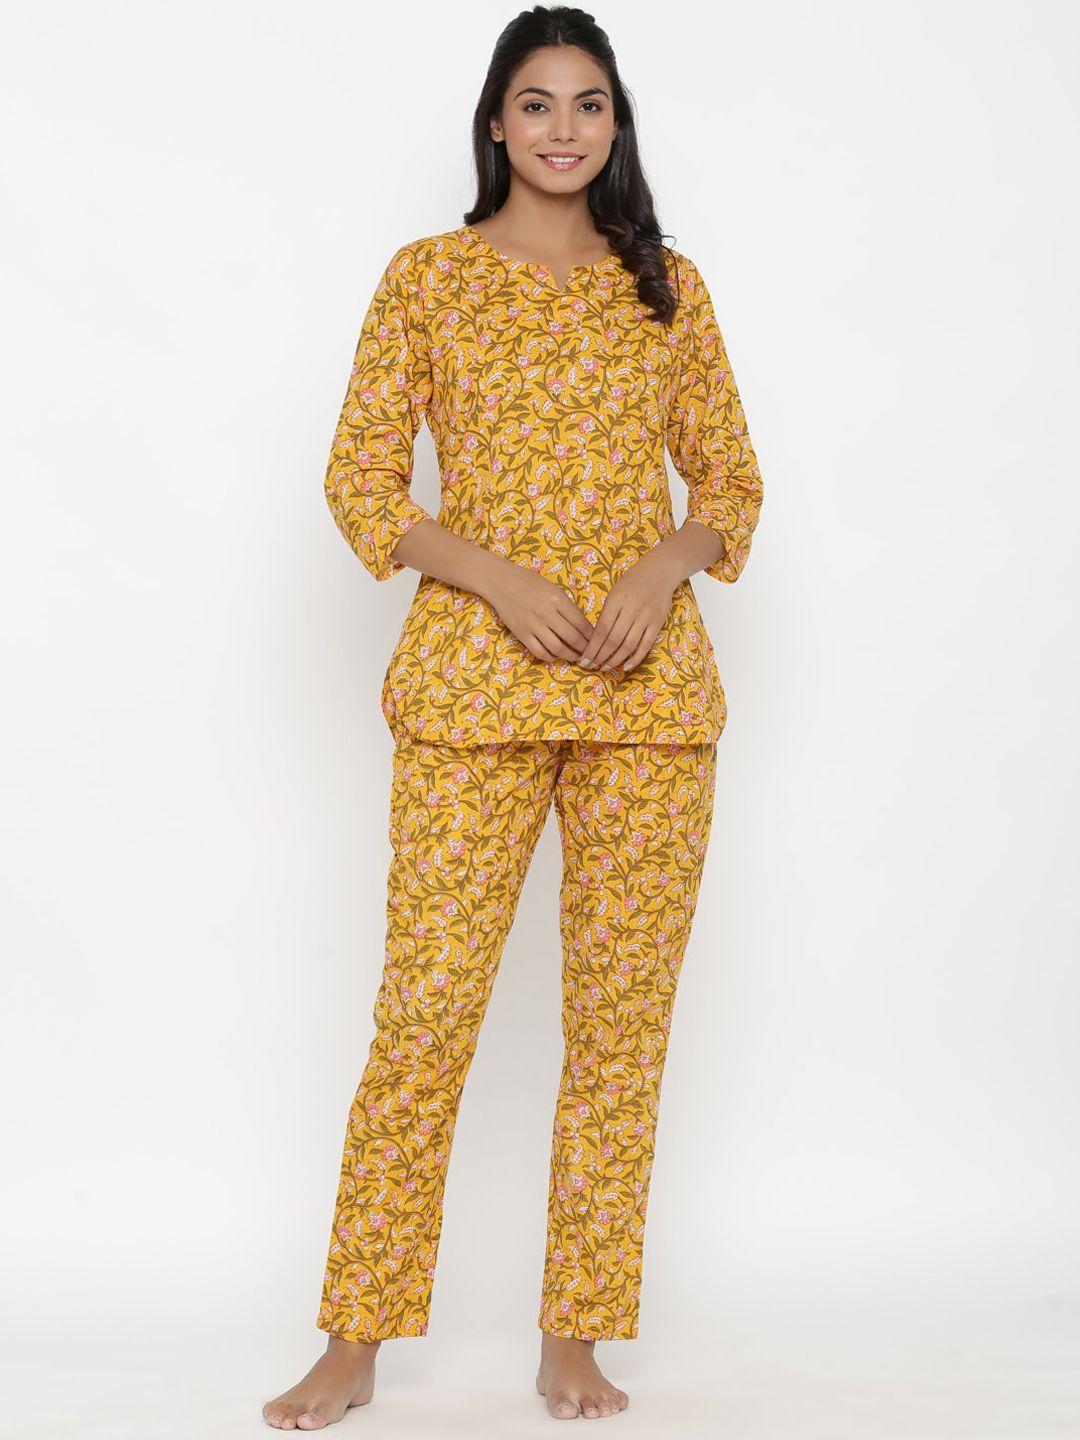 do-dhaage-women-mustard-yellow-floral-printed-cotton-night-suit